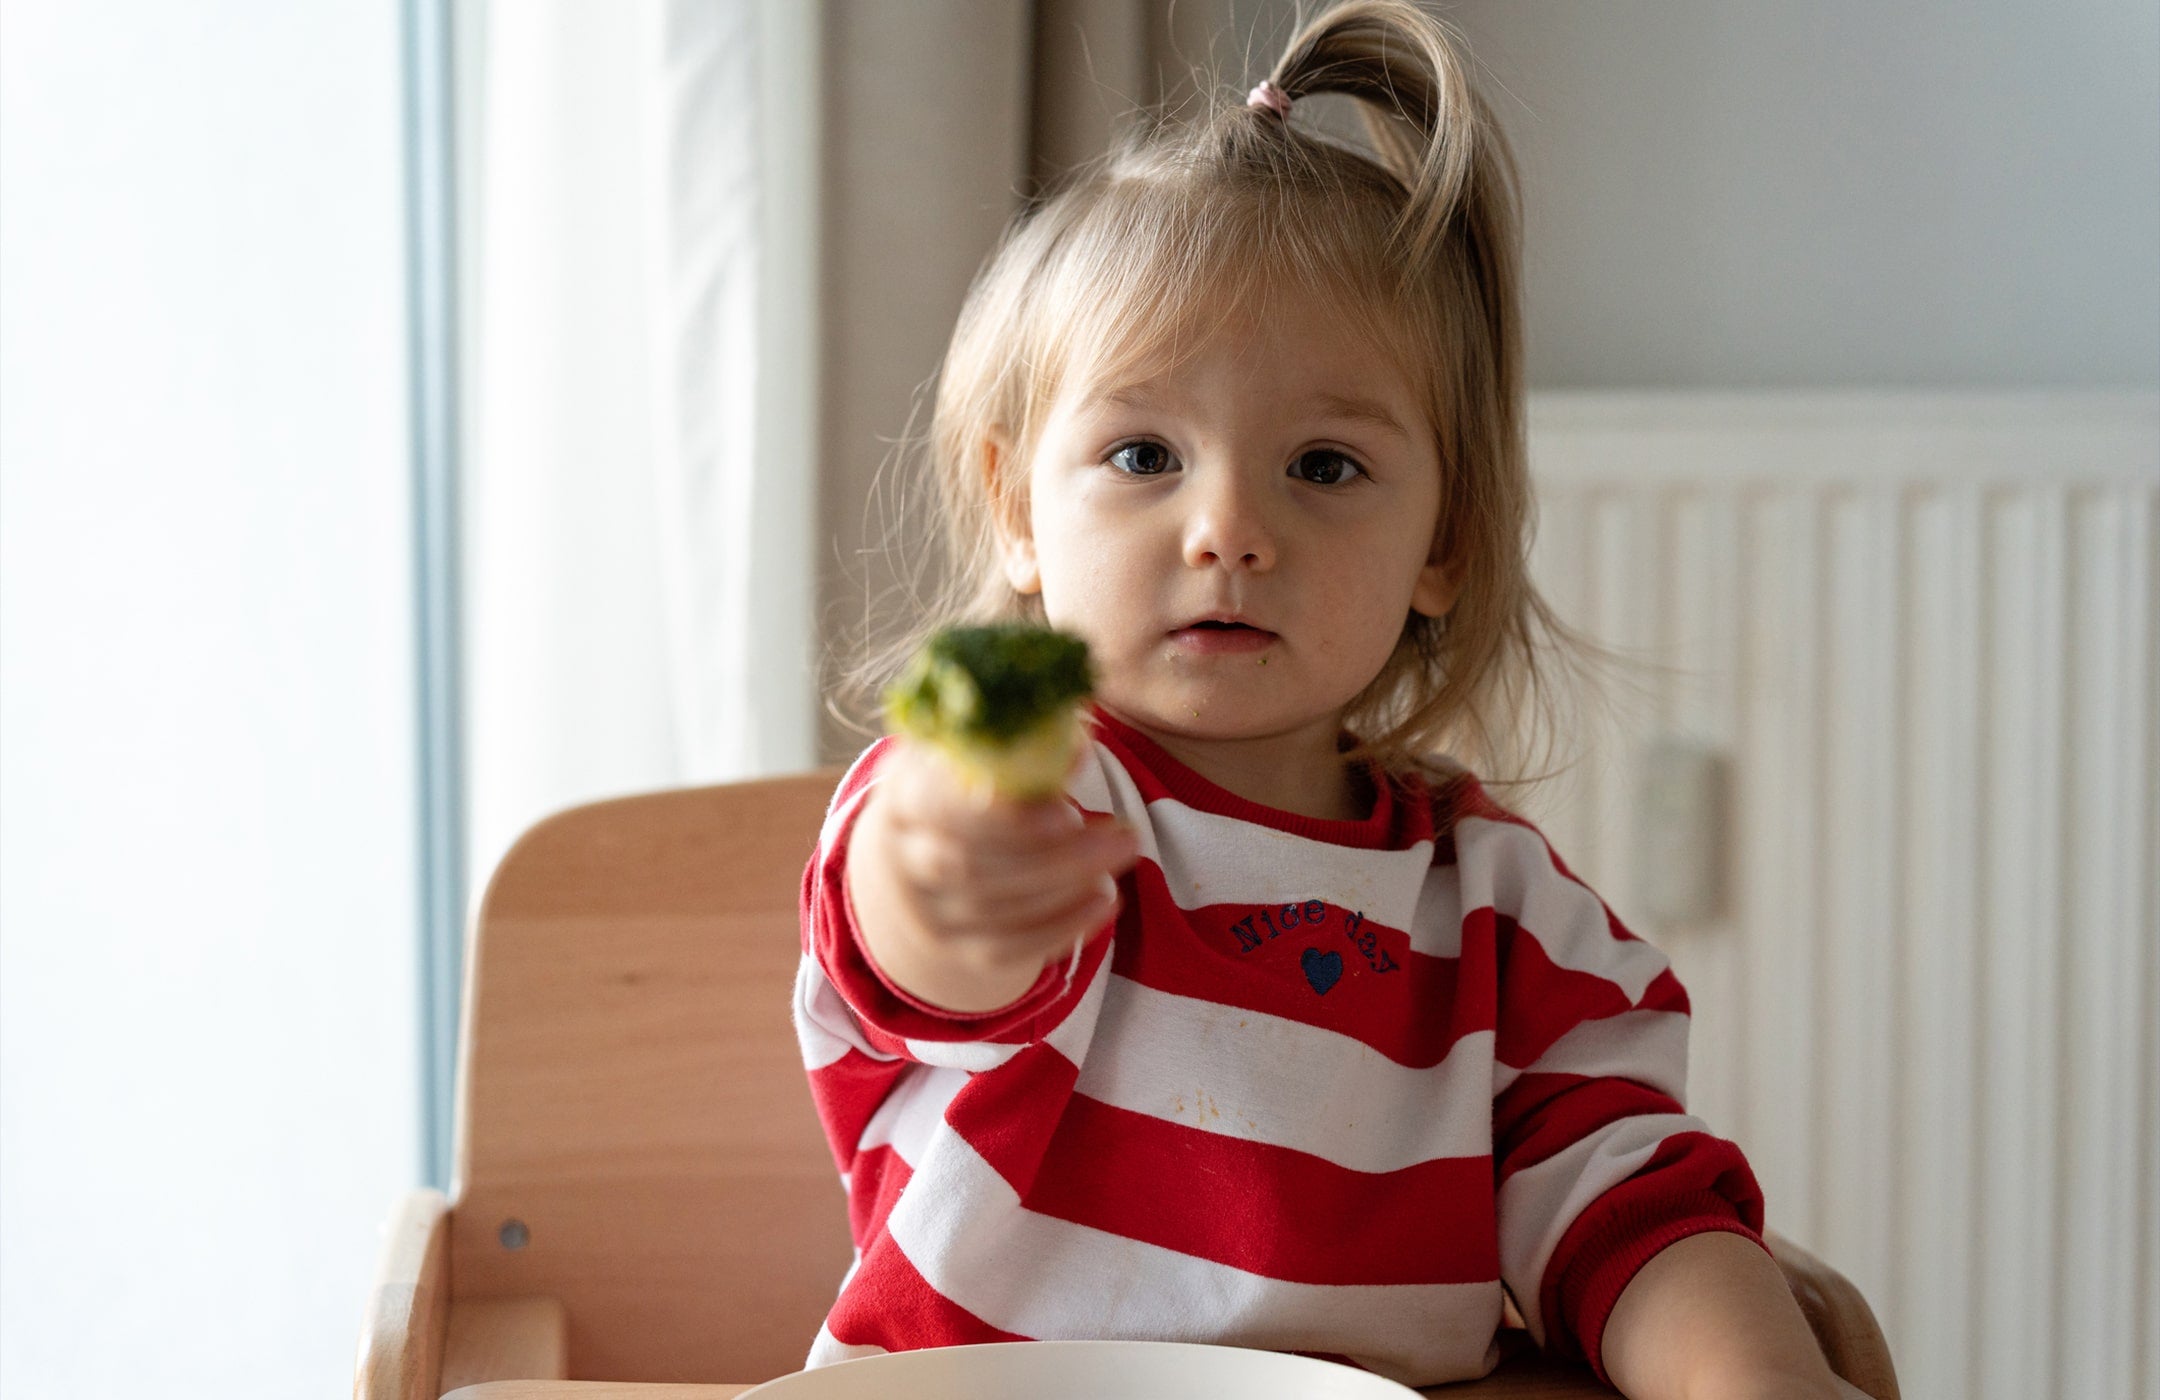 Food Regression 101: What to Do When Your Child Stops Liking Foods They Used to Eat